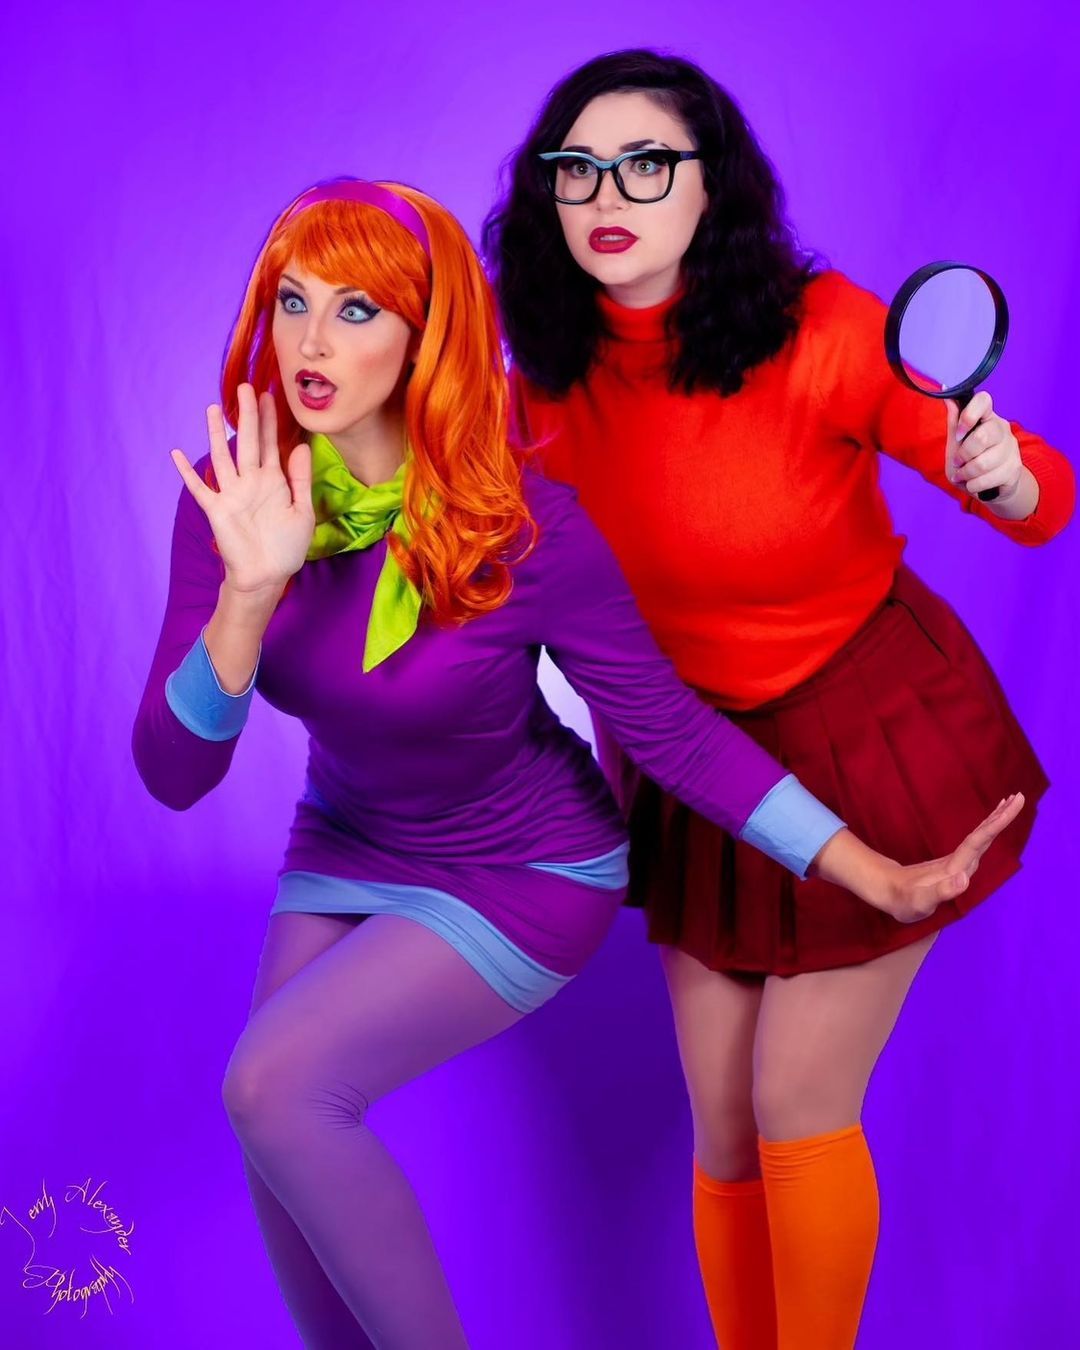 ScoobyDoo 10 Velma & Daphne Cosplay That Are Too Good